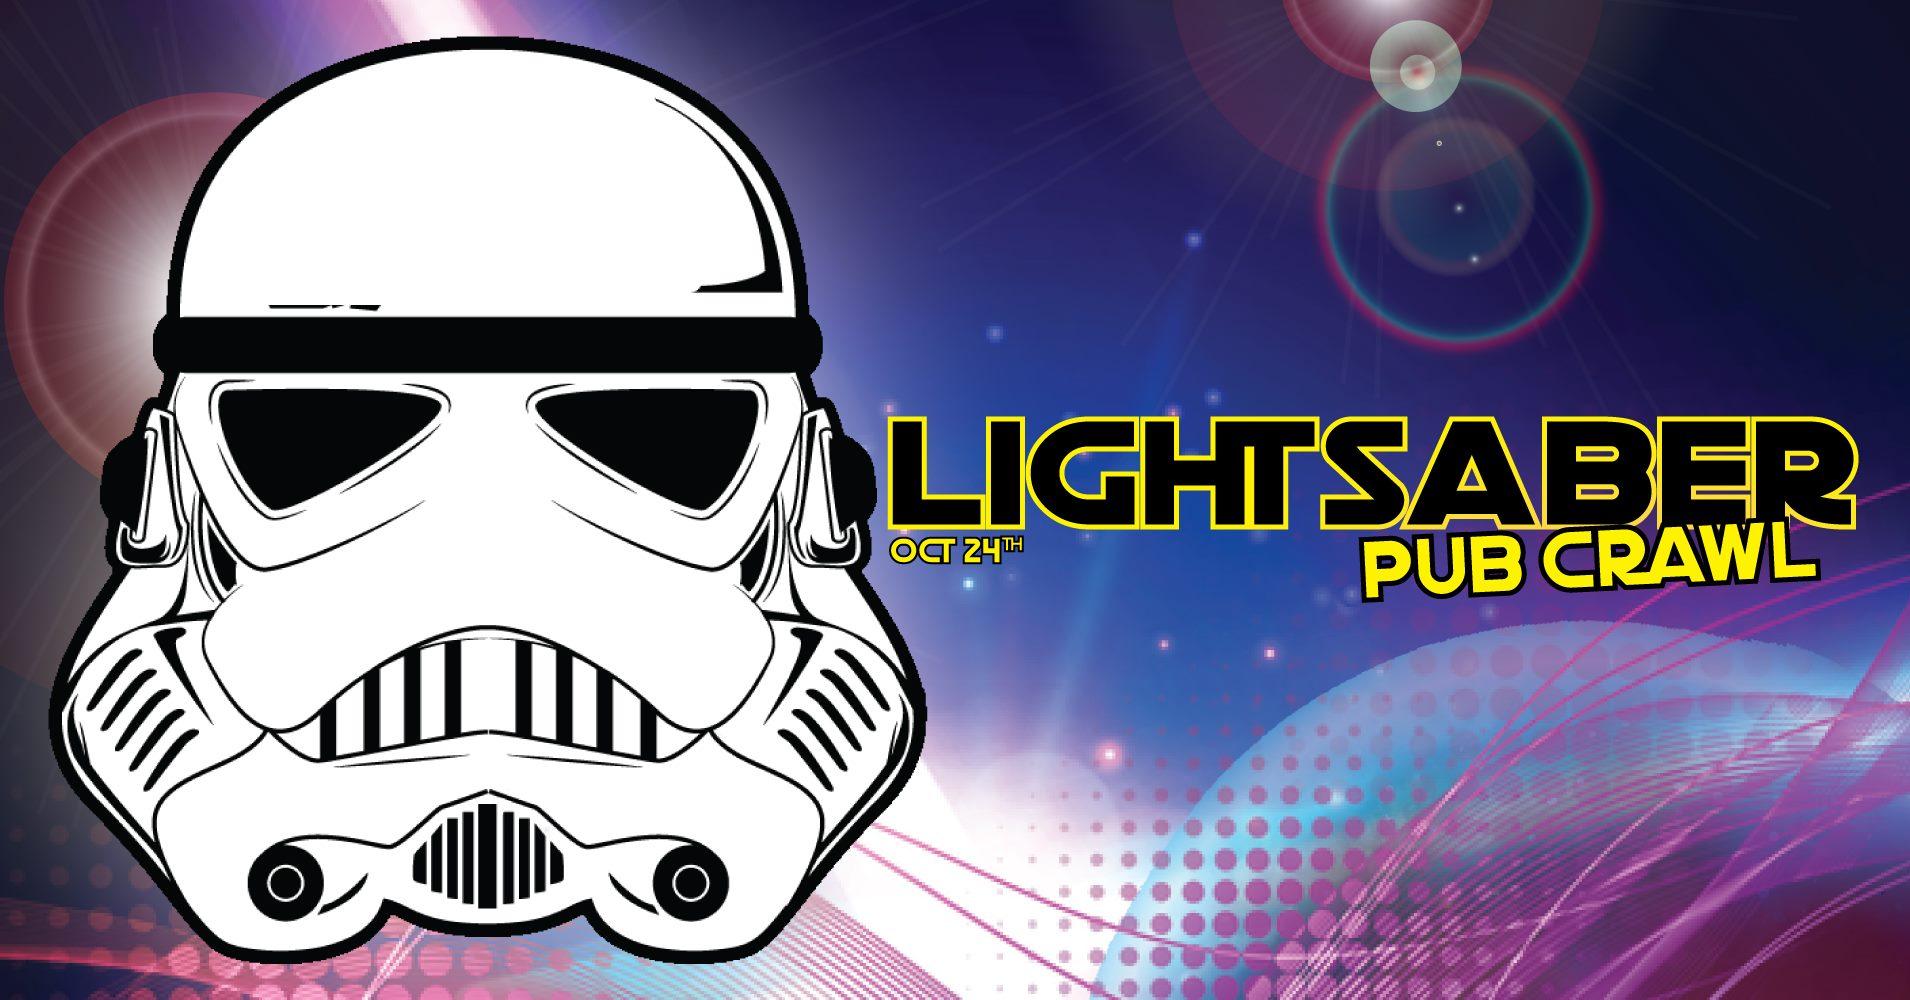 Tallahassee - Lightsaber Pub Crawl - $15,000 Costume Contest
Sat Oct 29, 3:00 PM - Sat Oct 29, 9:00 PM
in 9 days